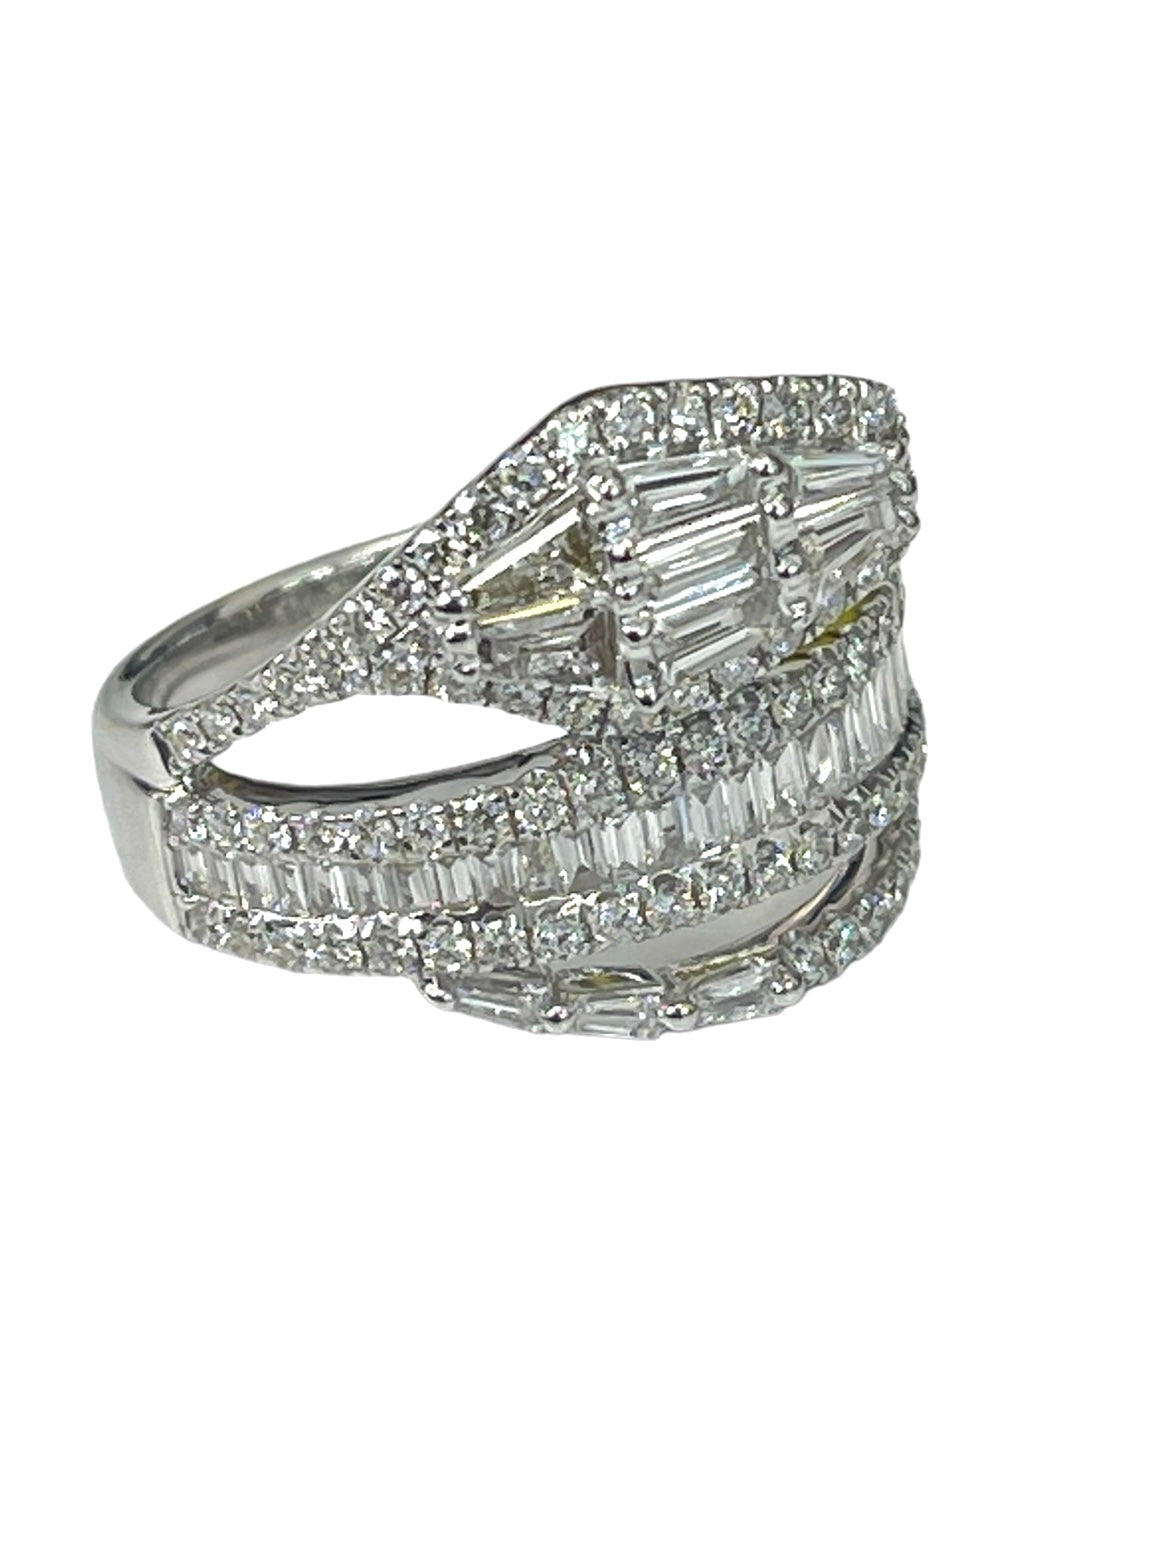 Baguettes and Round Brilliant Snake Cluster Diamond Ring White Gold 18kt